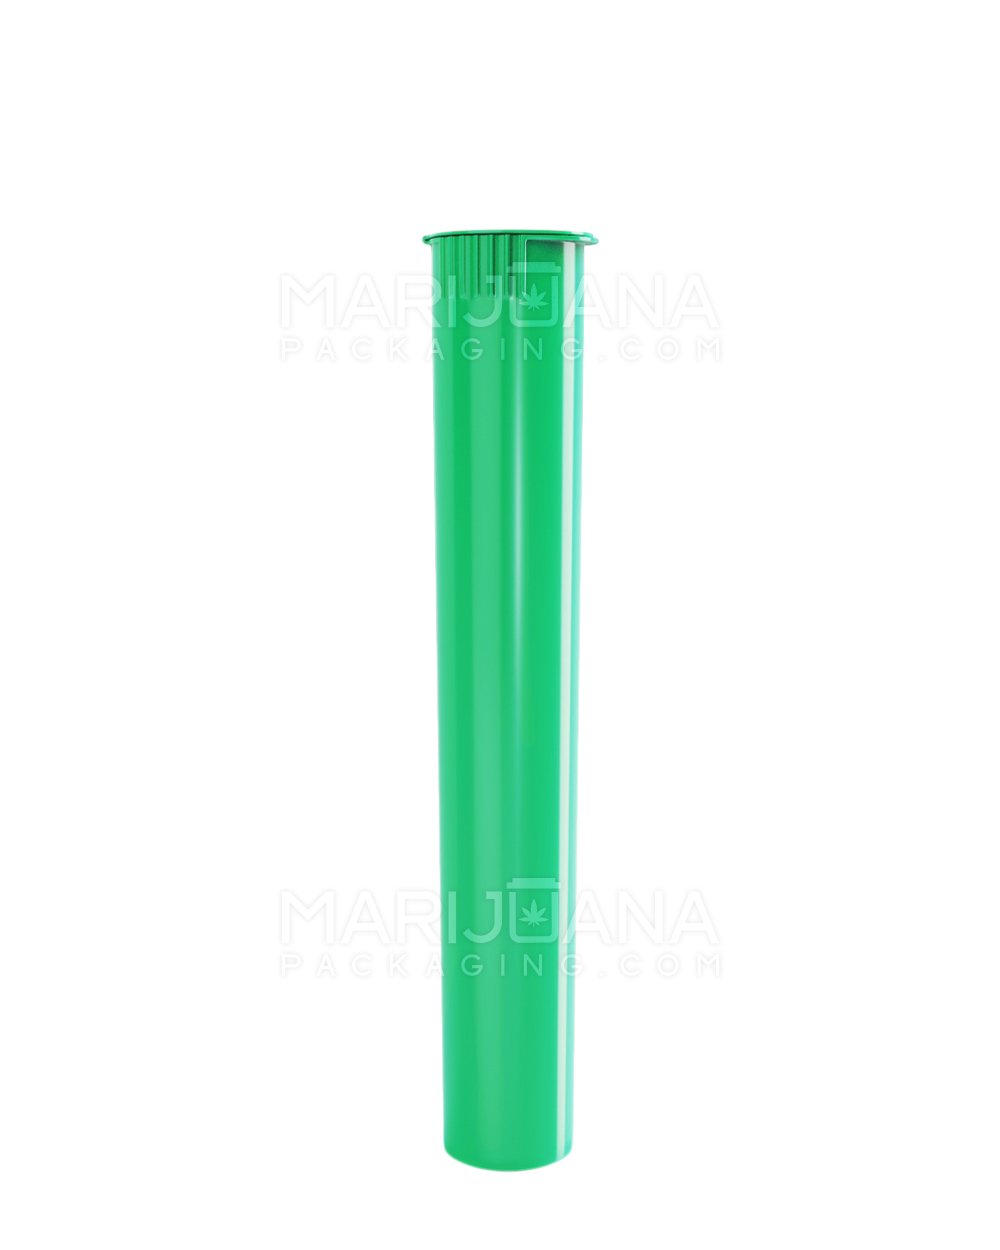 Child Resistant | King Size Pop Top Opaque Plastic Pre-Roll Tubes | 116mm - Green - 1000 Count - 2